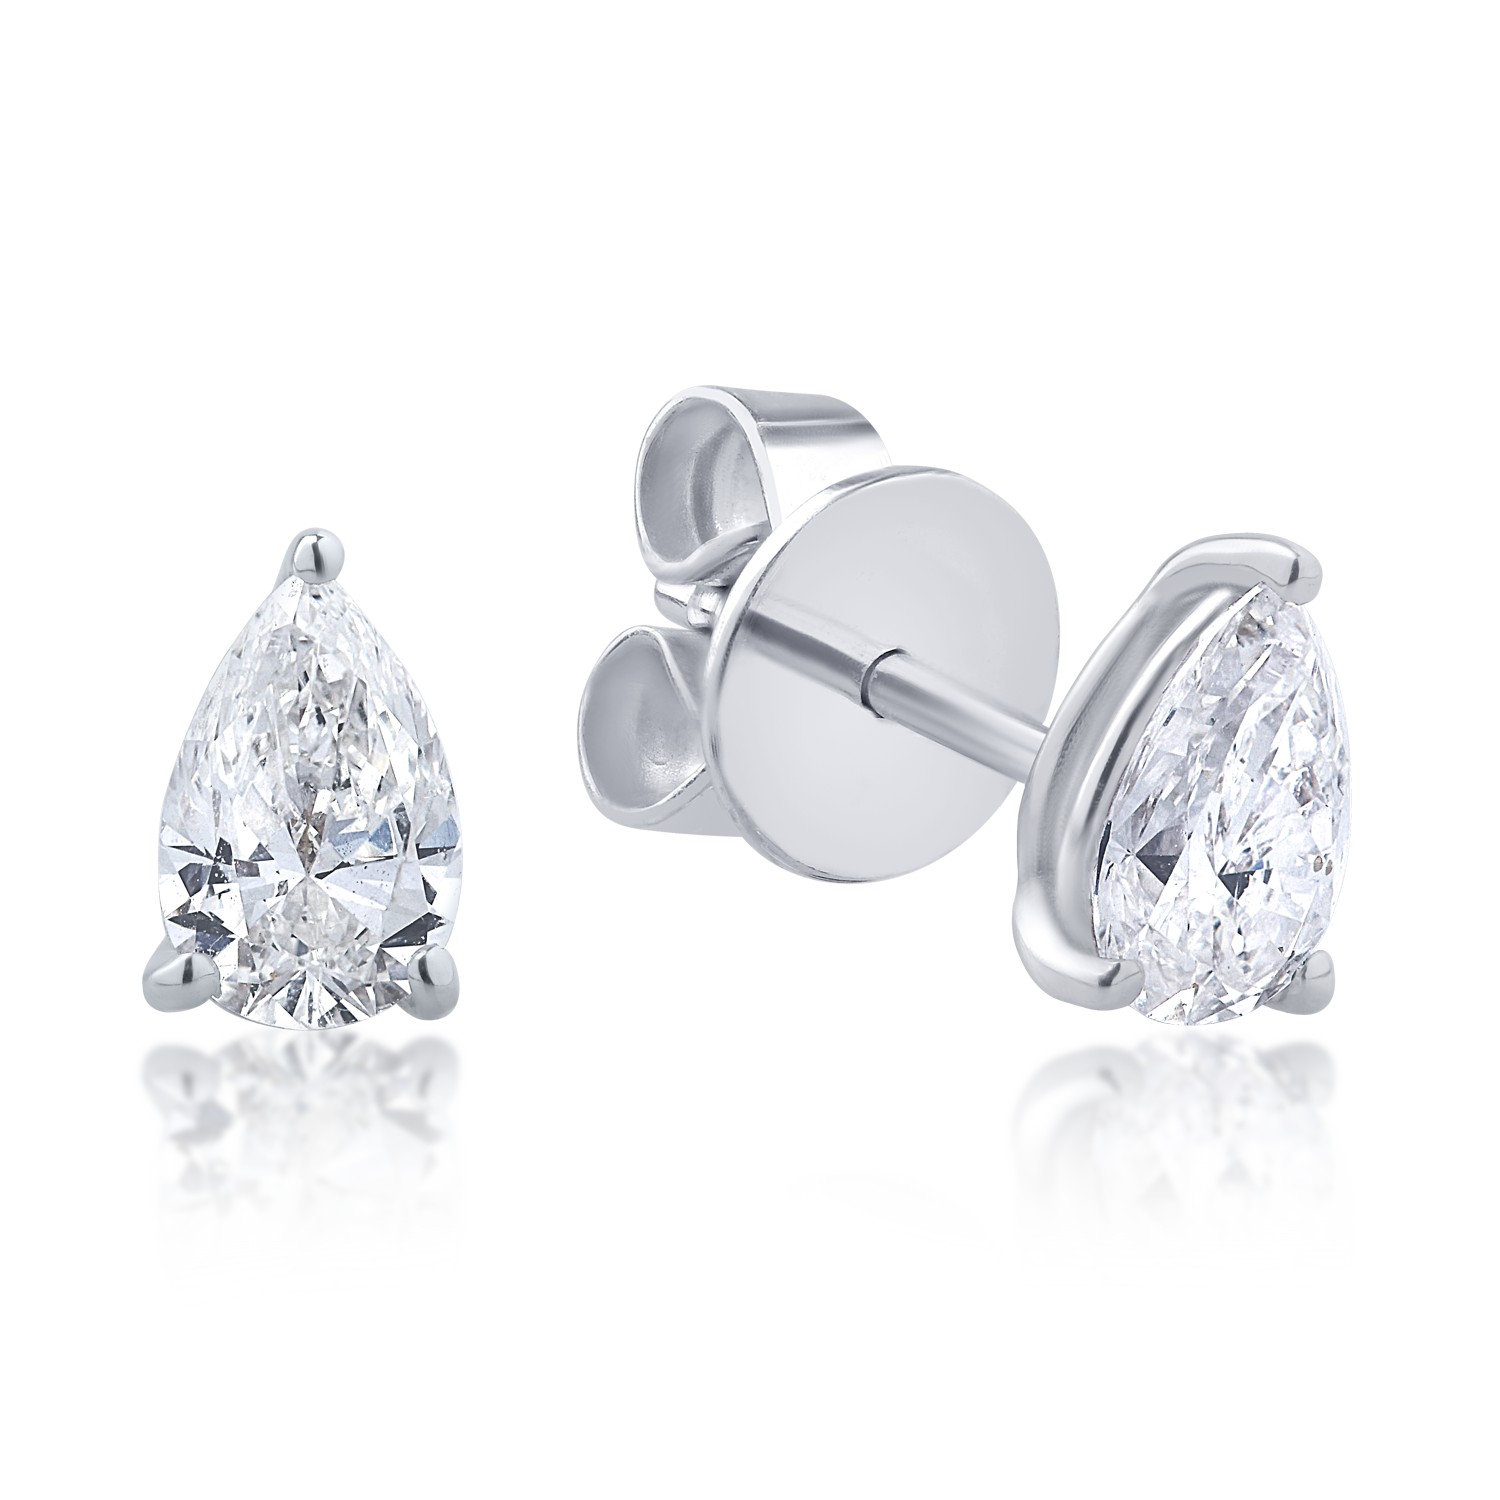 18K white gold earrings with 0.8ct diamonds